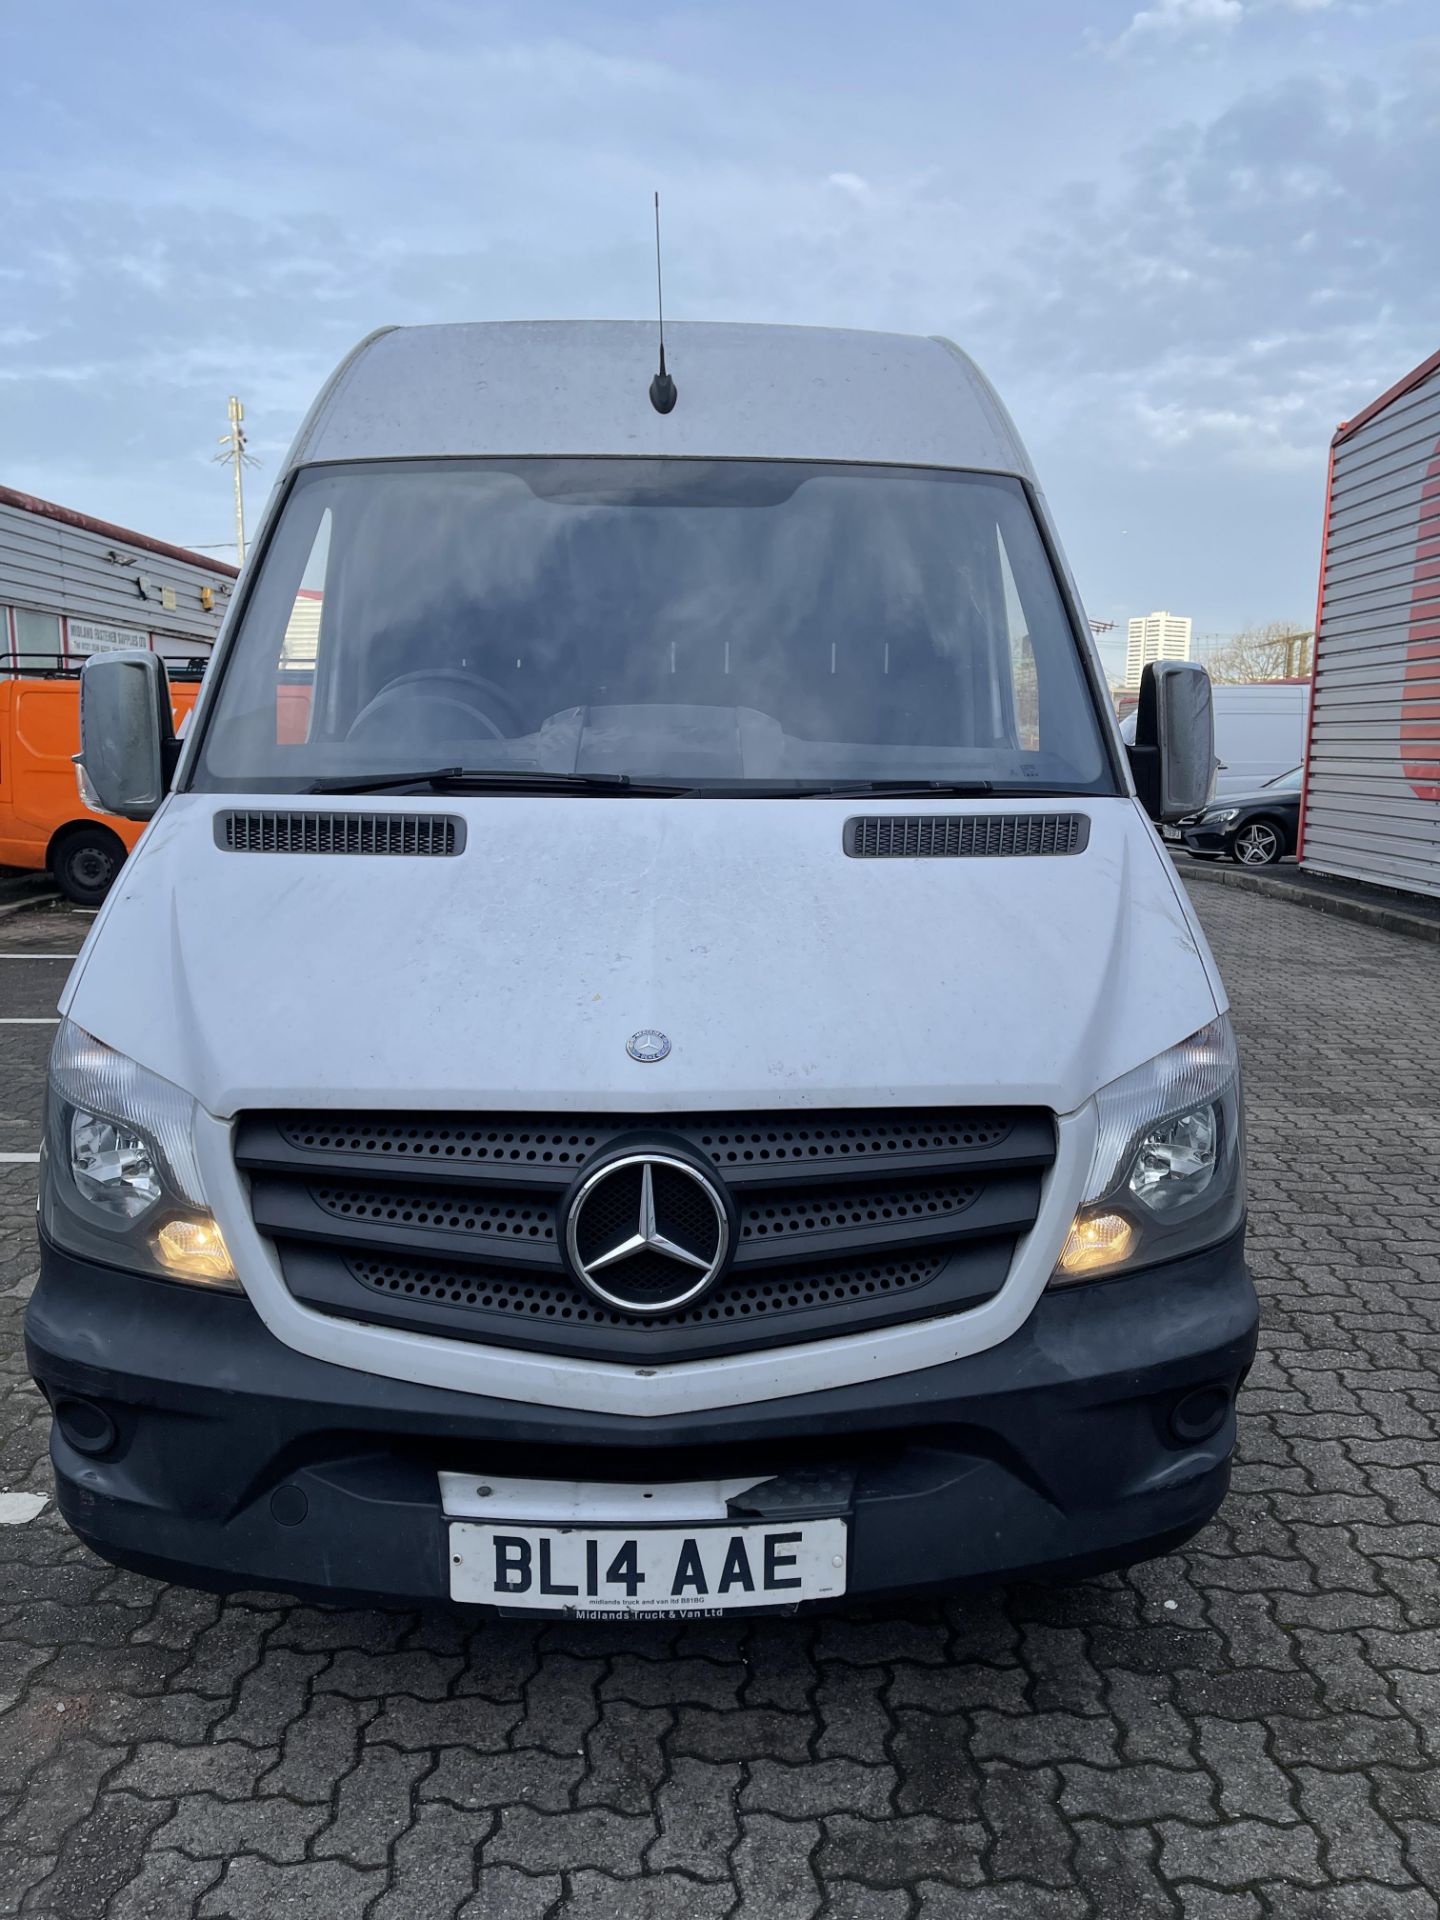 2014 - Mercedes Sprinter MWB - Facelift Model - Low Miles for Age - Image 14 of 39